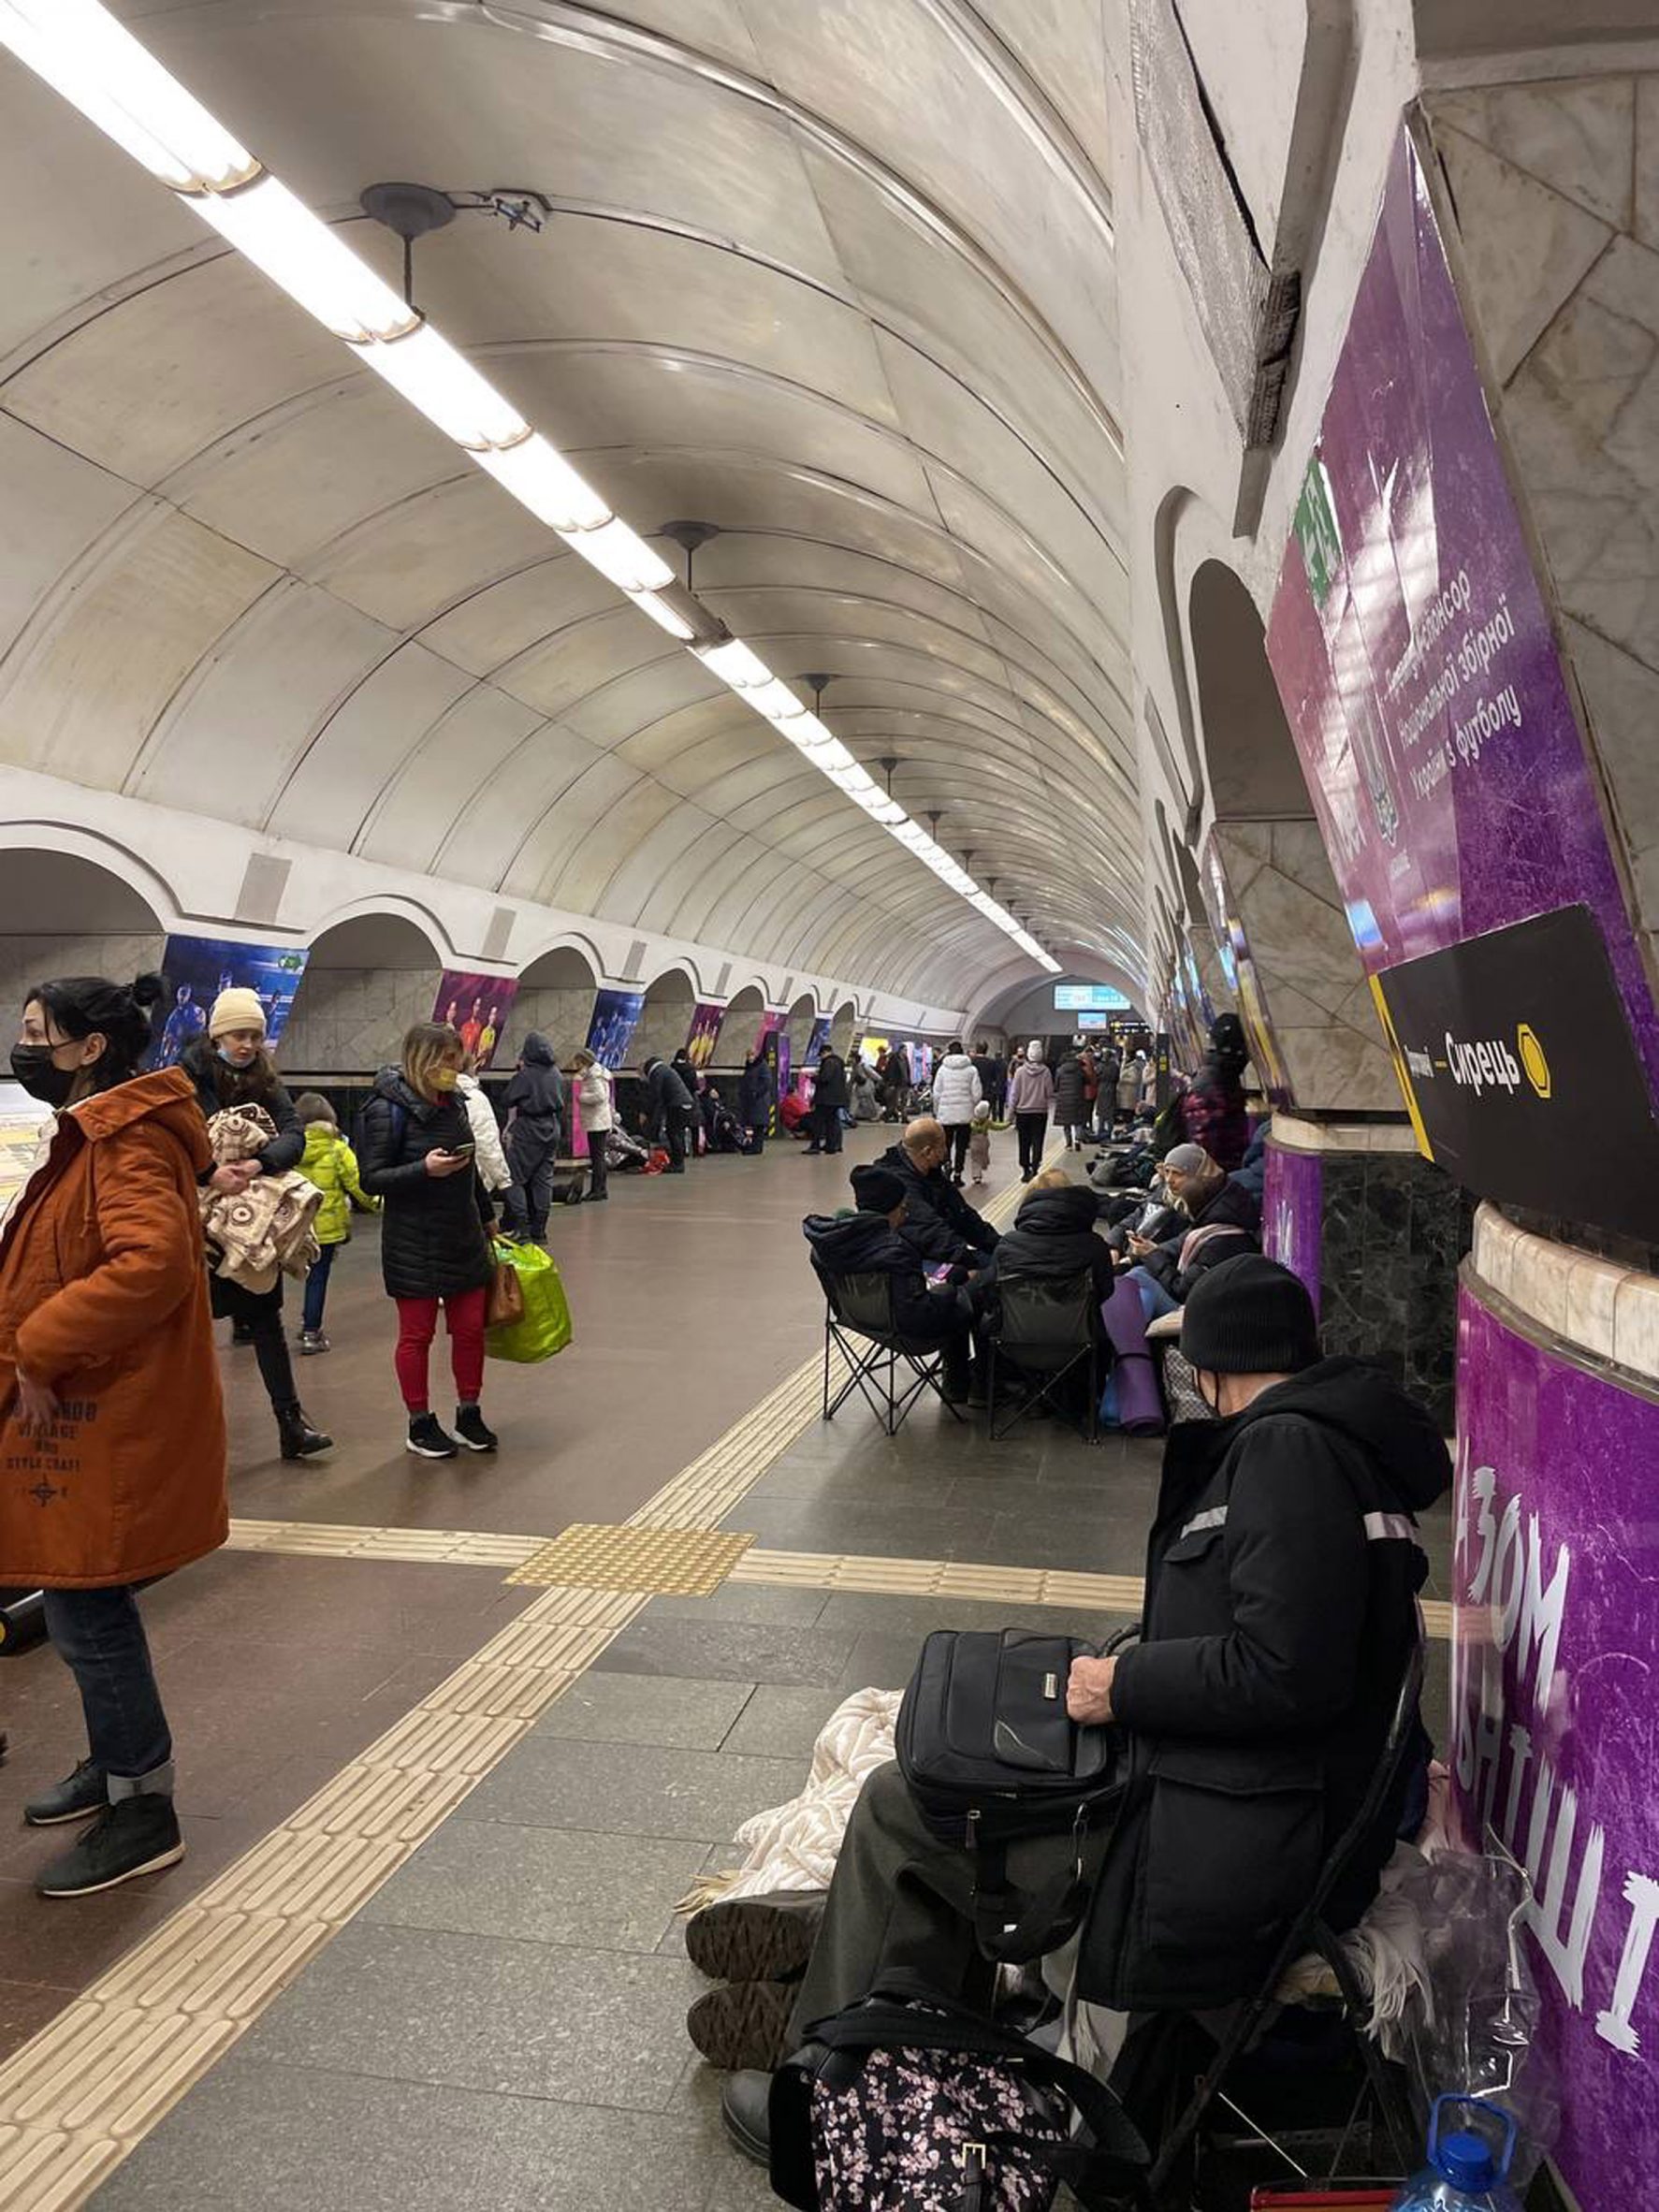 People sheltering in Kyiv metro station during Russian invastion